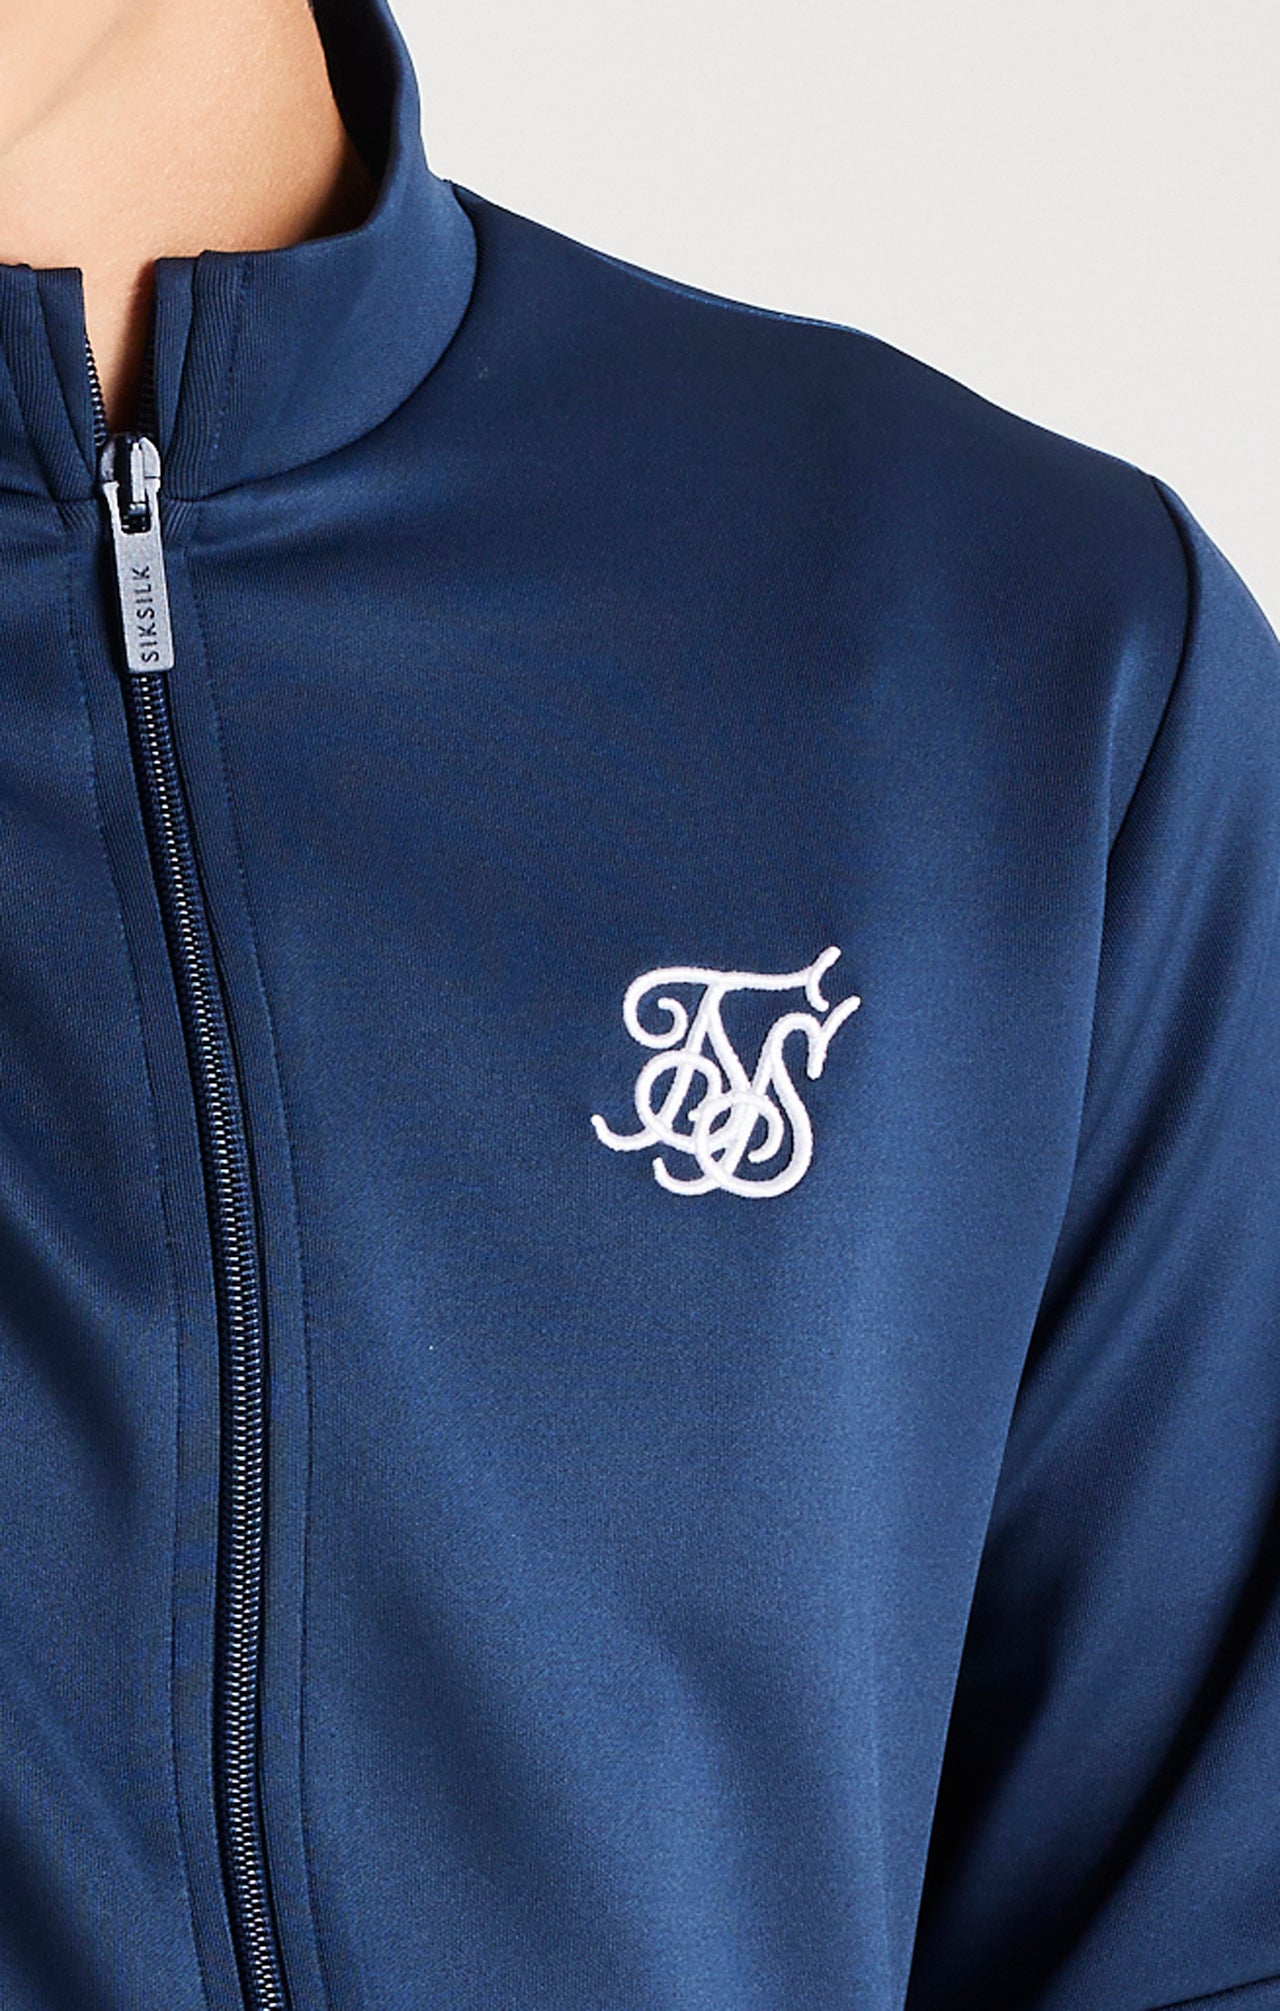 SikSilk Zonal Fade Track Top - Navy (1)